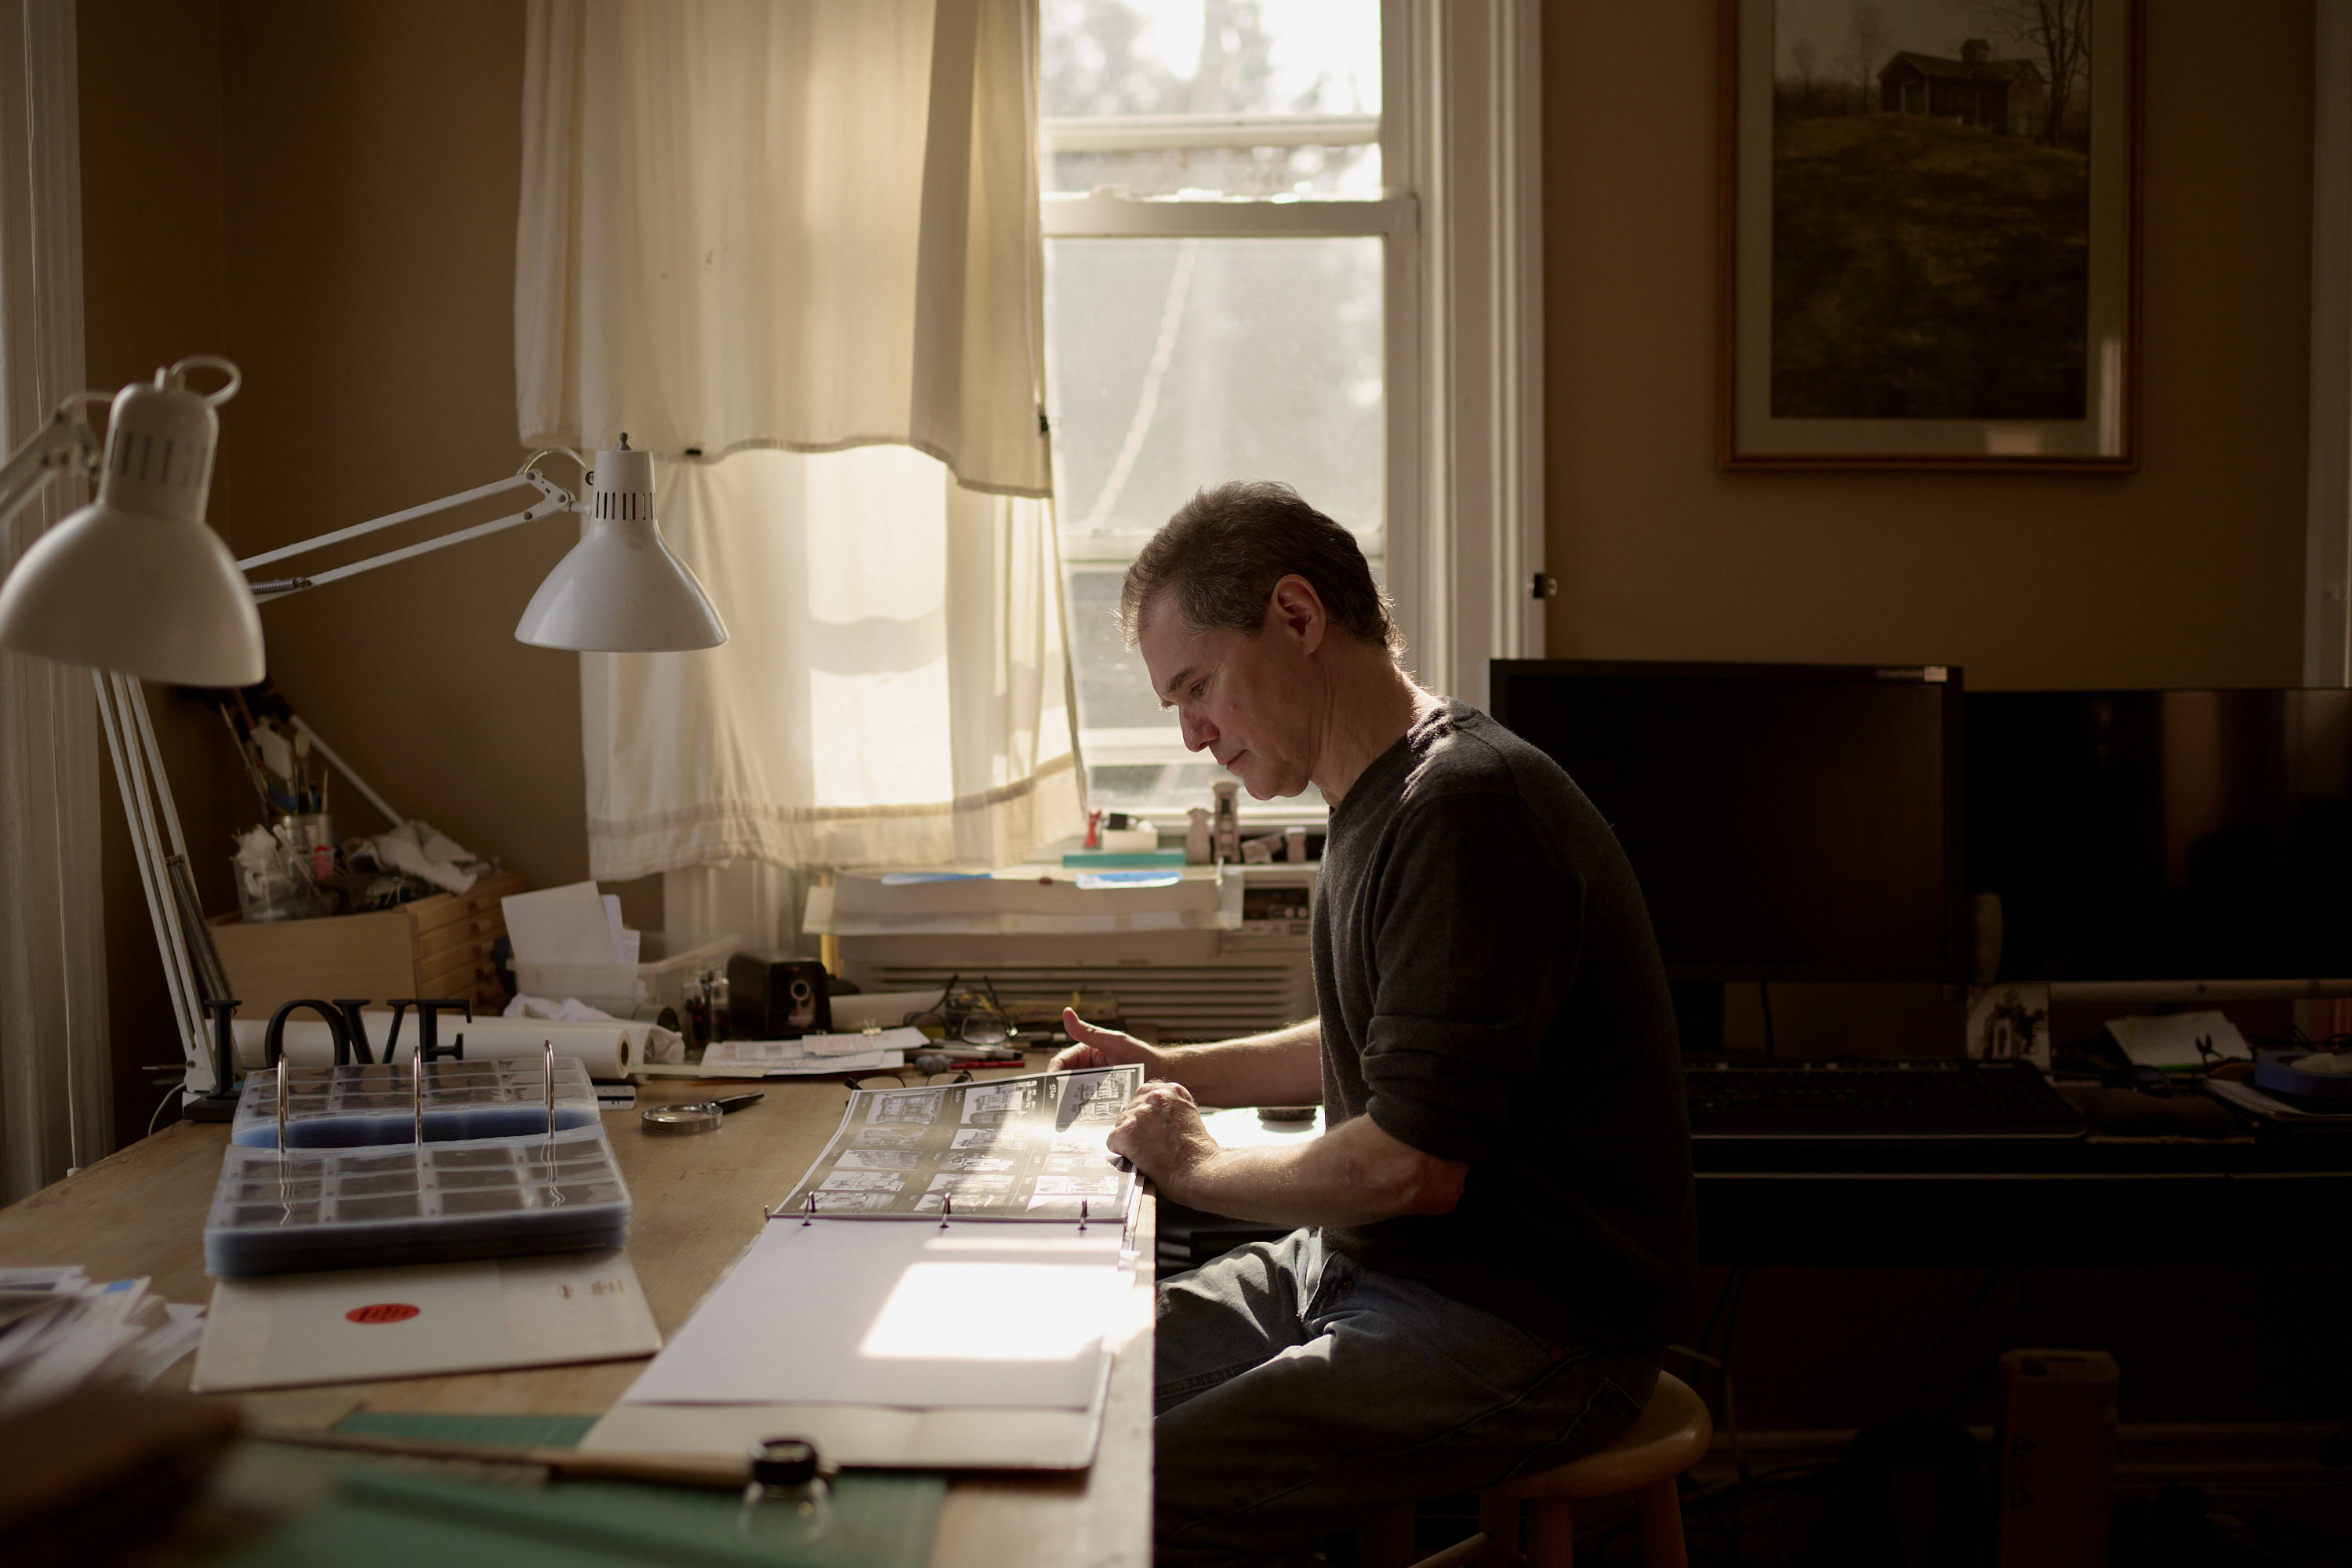 A person is focused on reviewing documents at a cluttered desk with warm lighting from a window.